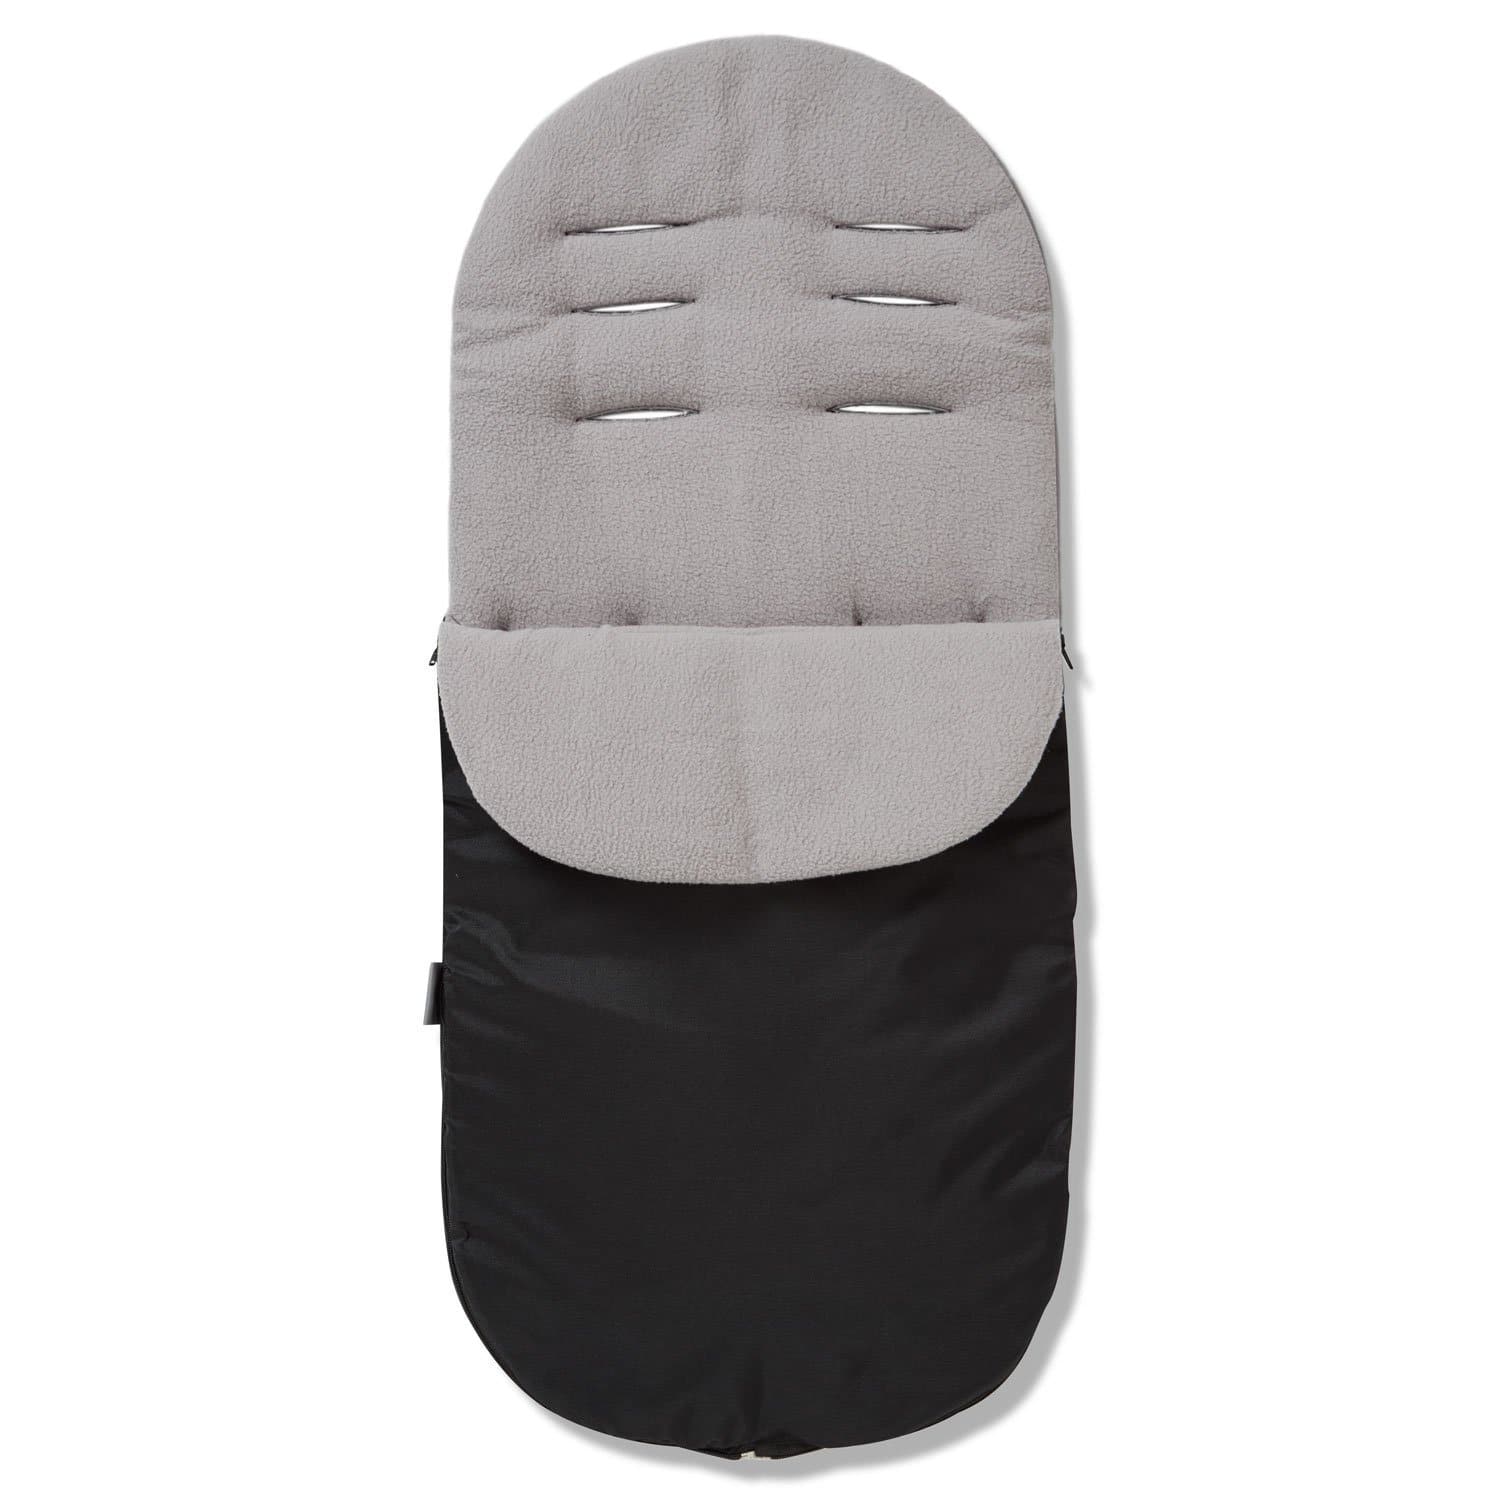 Footmuff / Cosy Toes Compatible with TFK - Grey / Fits All Models | For Your Little One